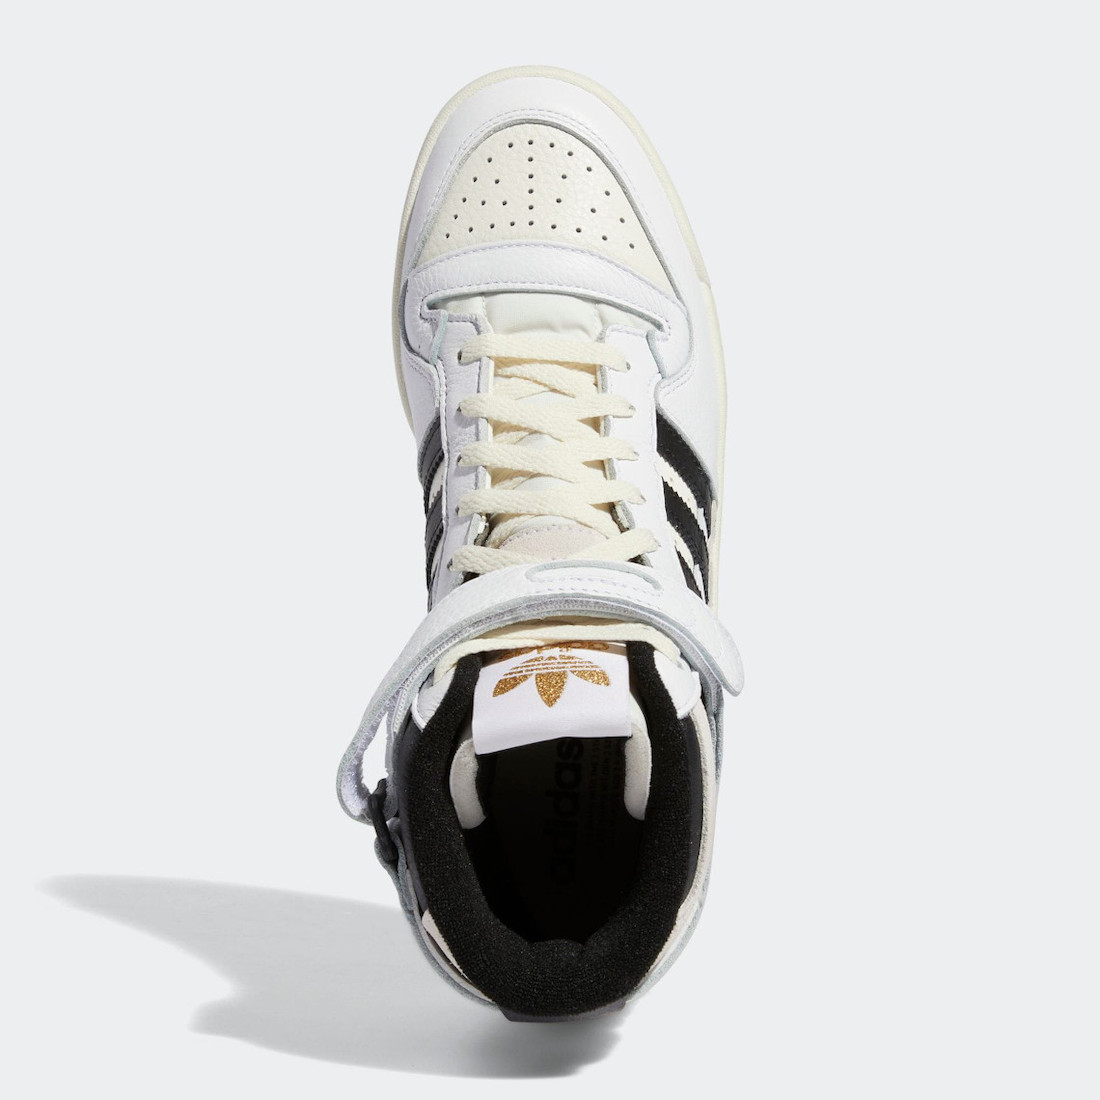 adidas Forum 84 High White Black GY5847 Release Date Info | SneakerFiles